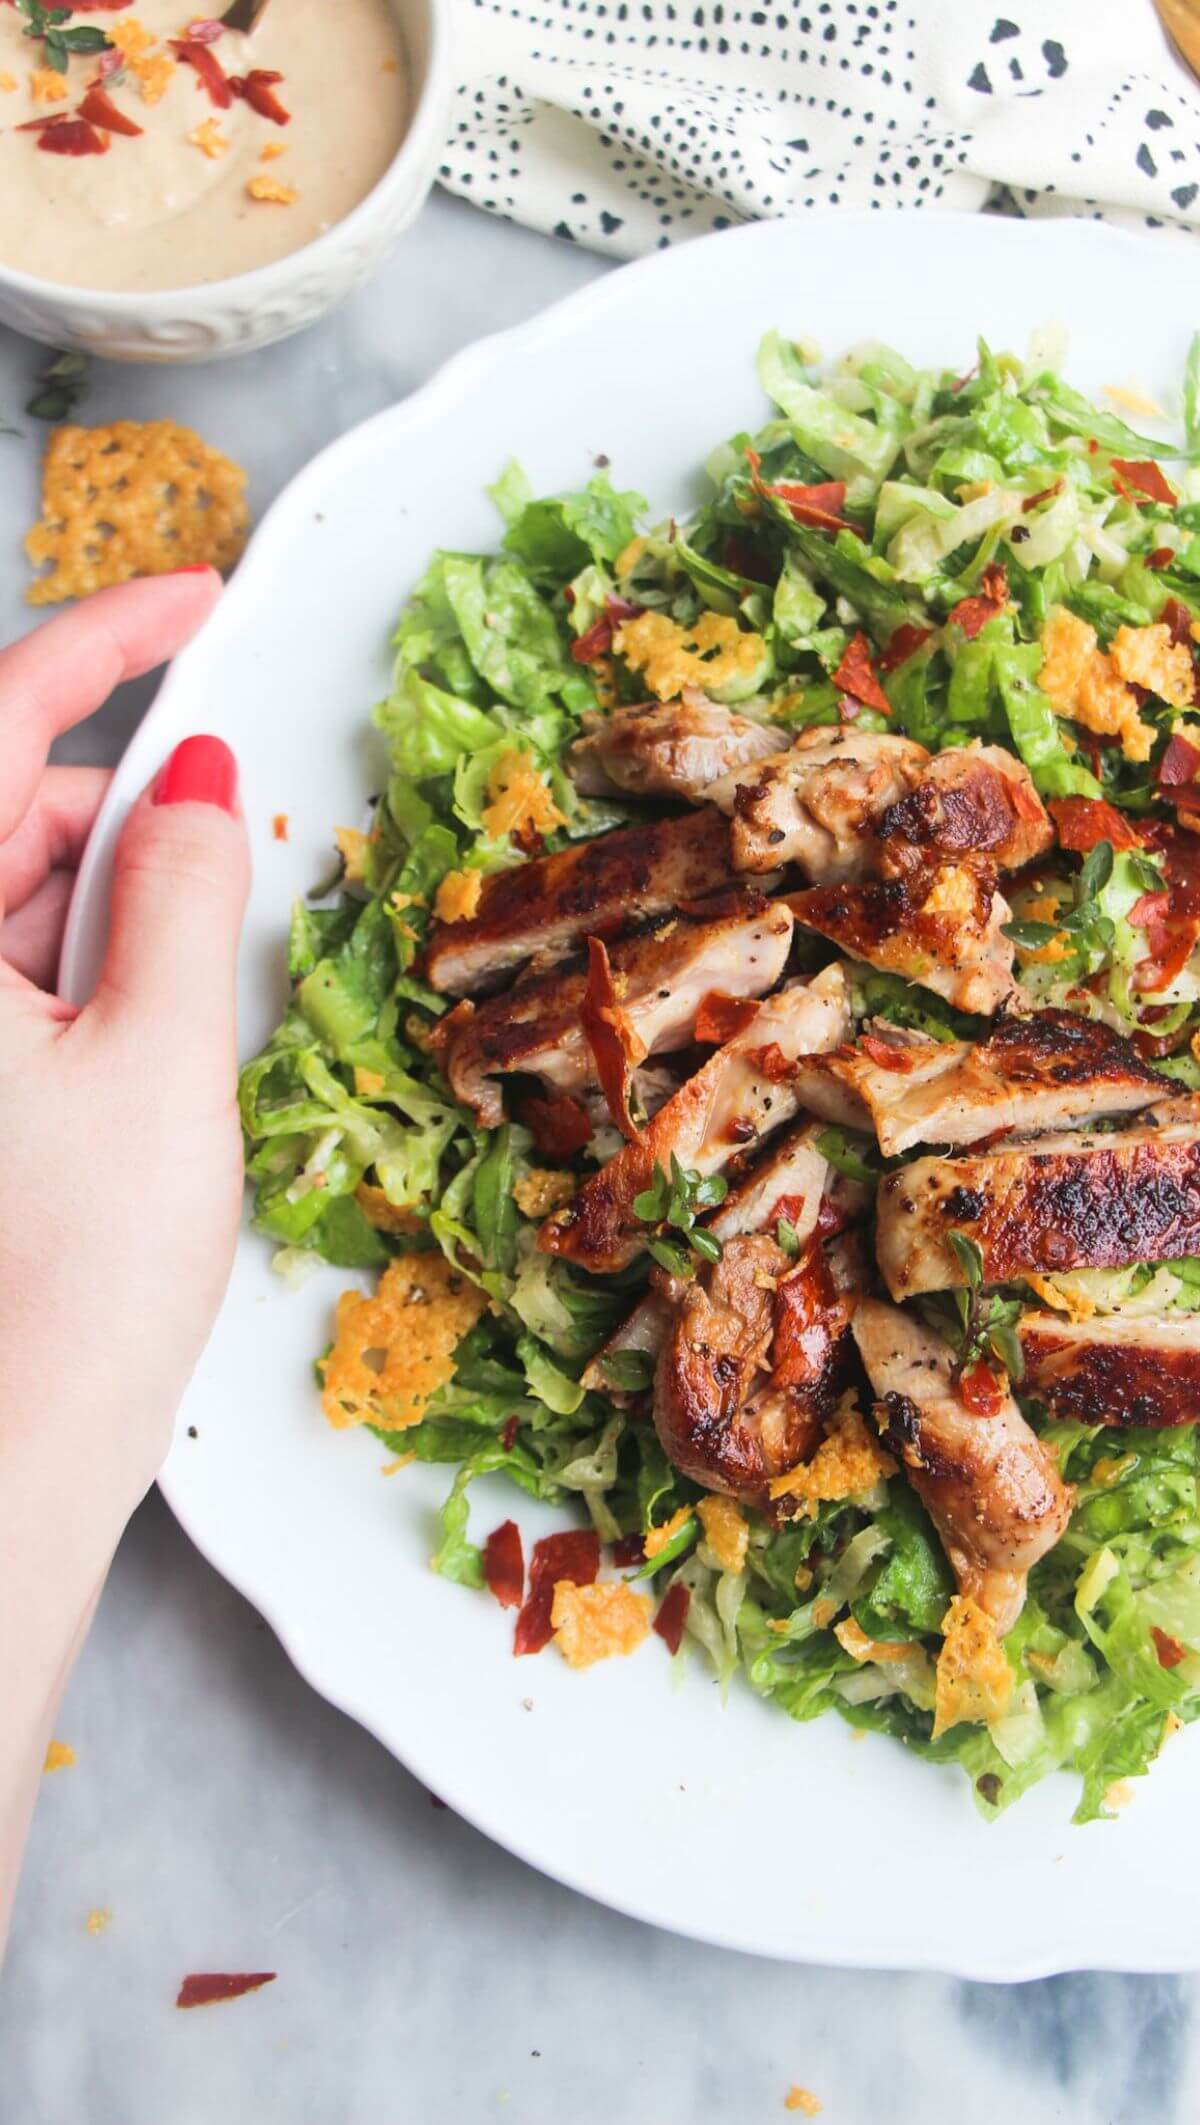 A hand holding a large white plate with sliced grilled chicken on top of green chopped lettuce.